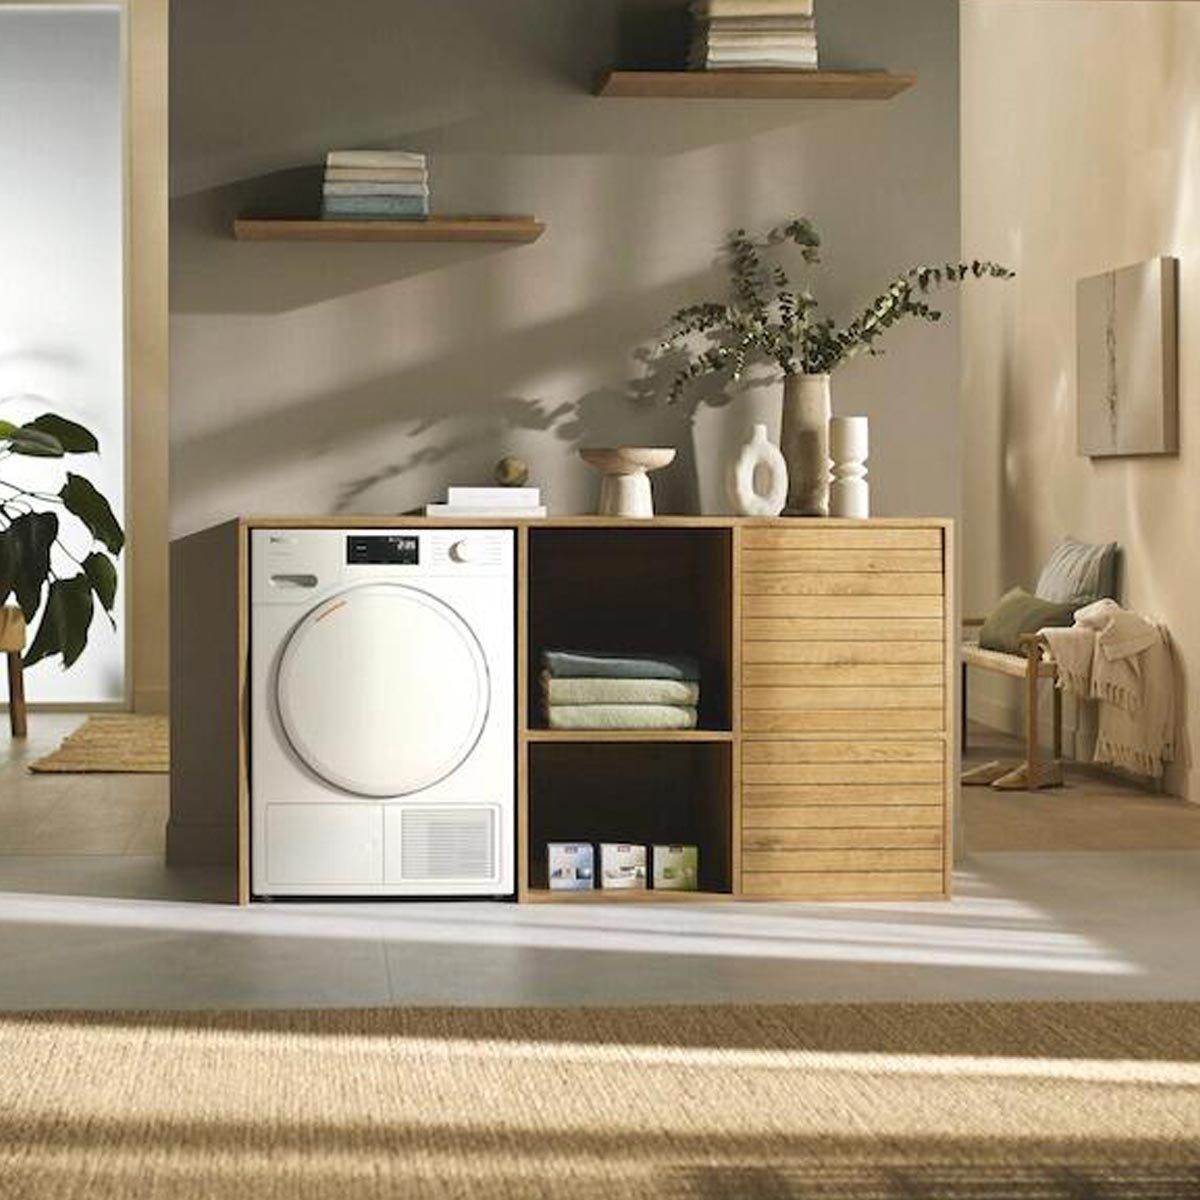 These portable washing machines make small living spaces more